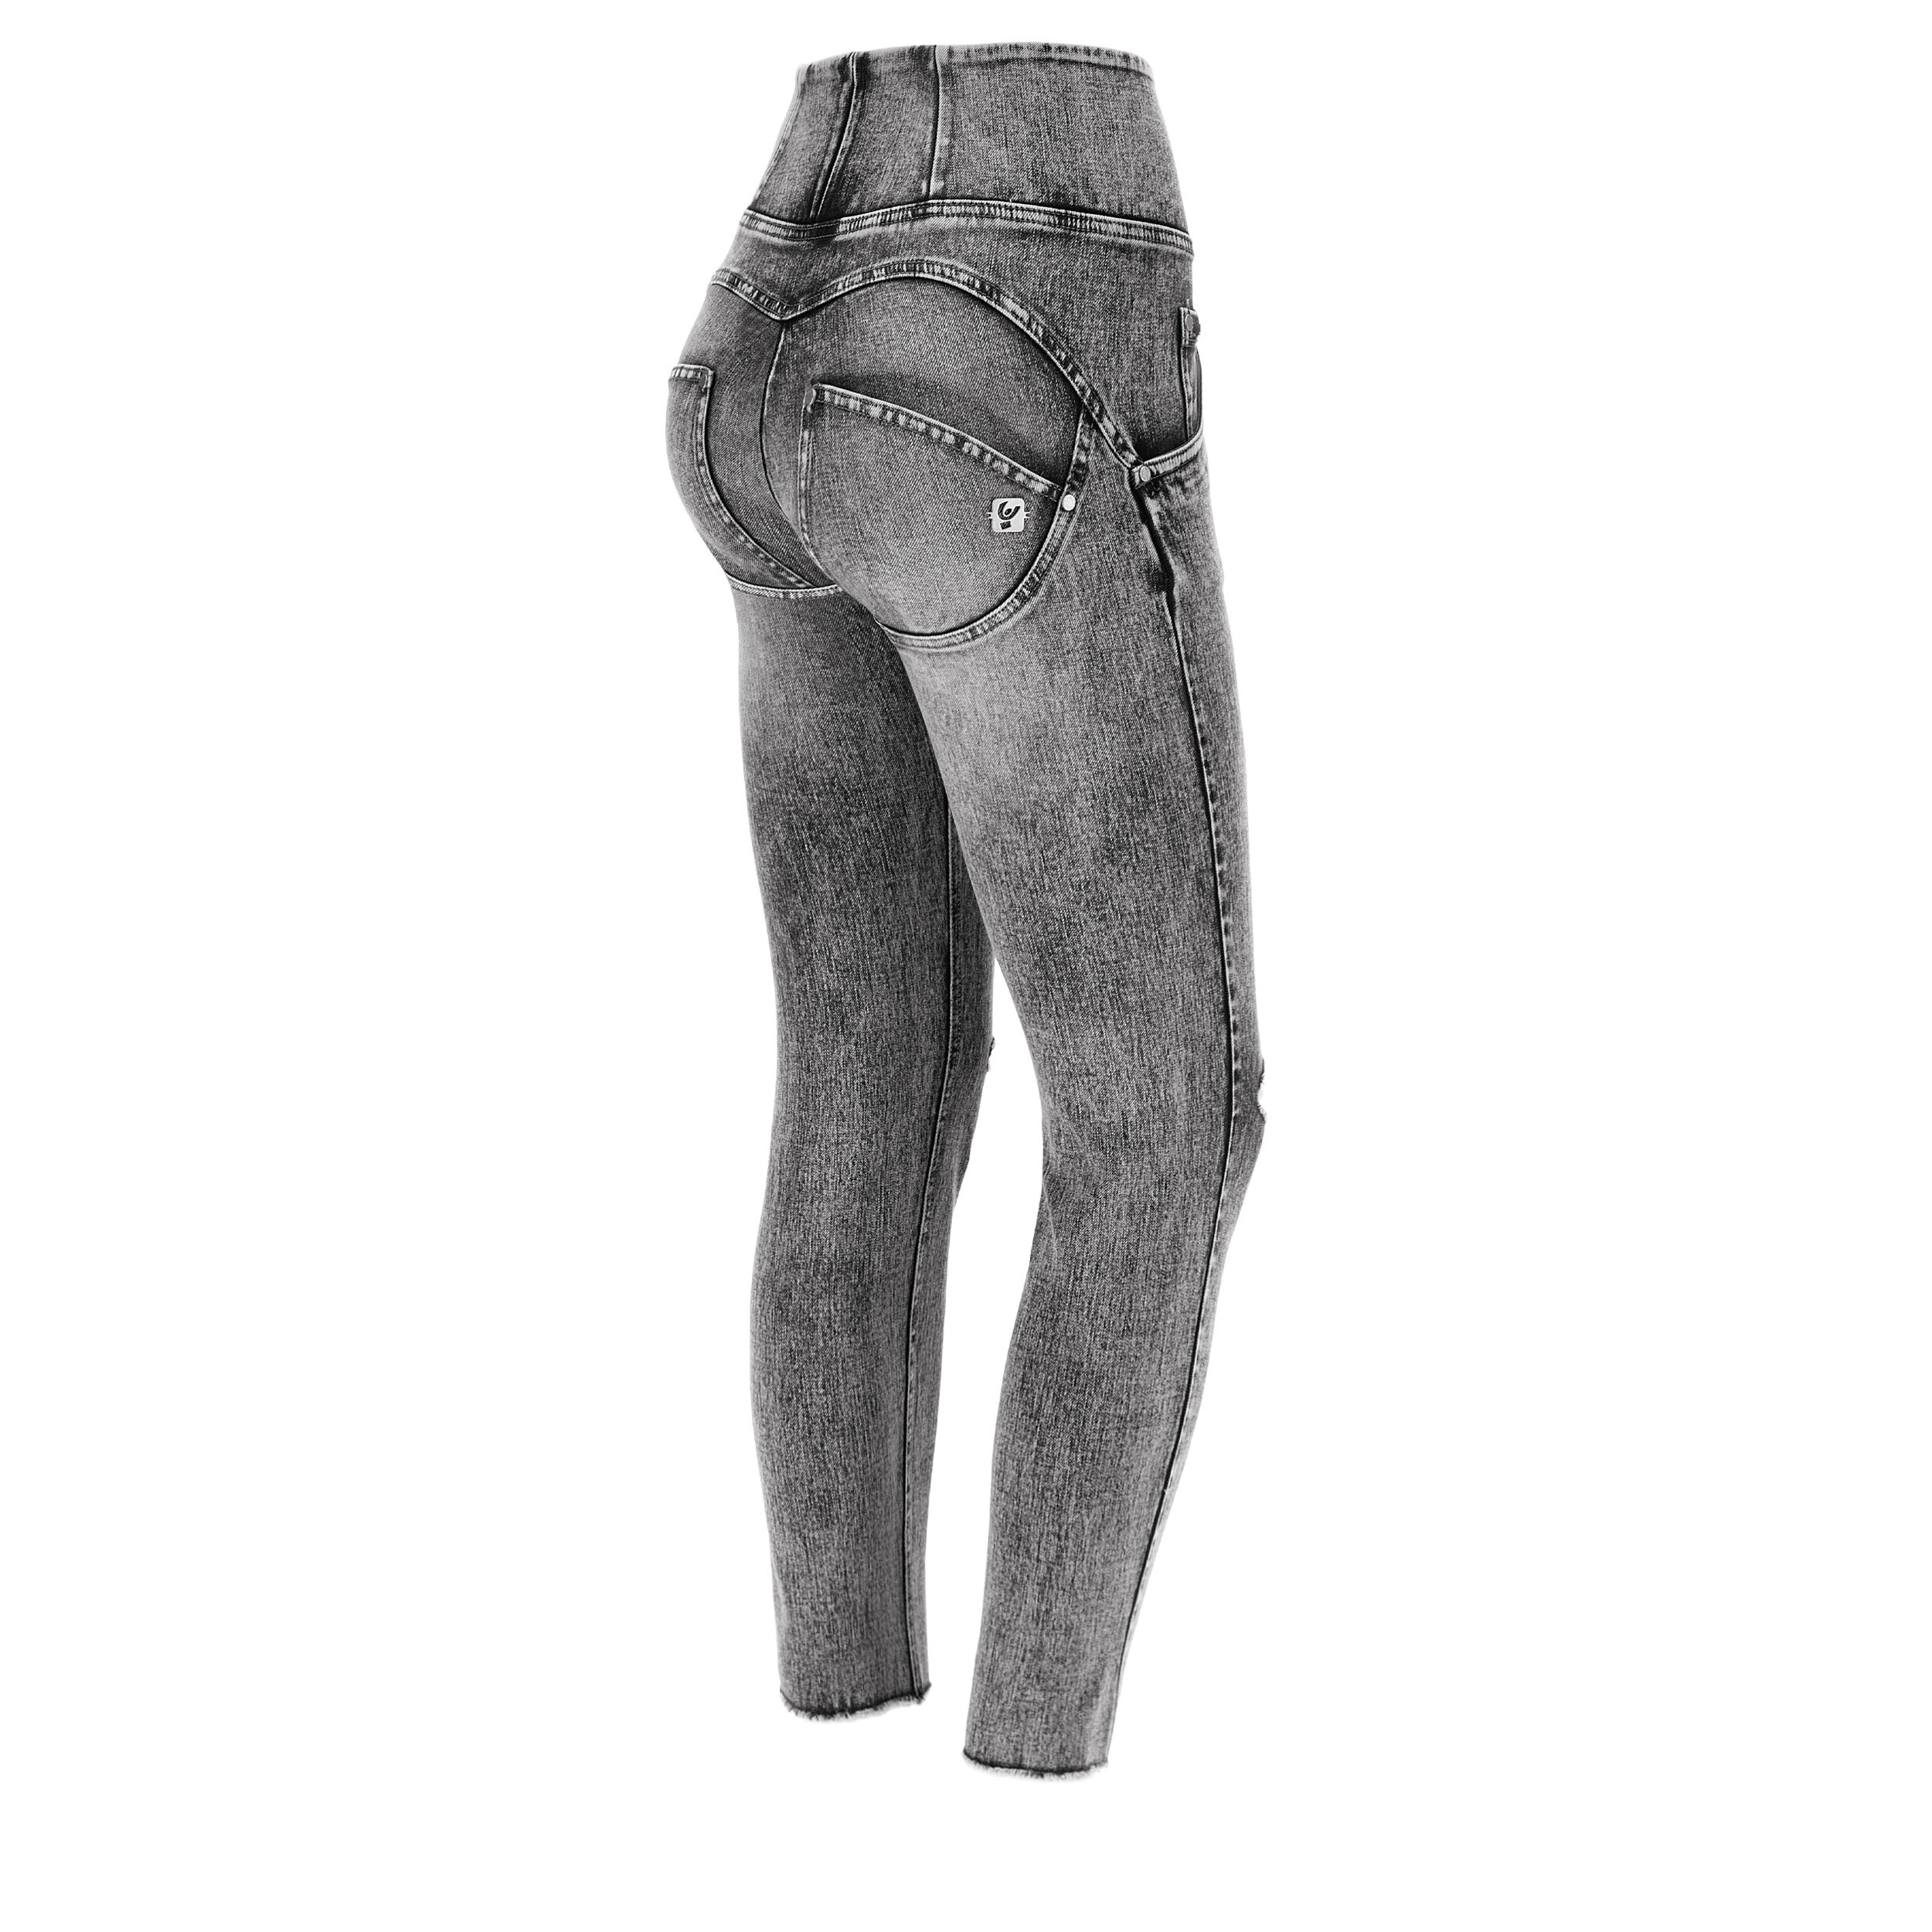 Freddy Jeans push up WR.UP® 7/8 superskinny denim effetto marble wash Jeans Slavato-Cuciture Grigie Donna Extra Small